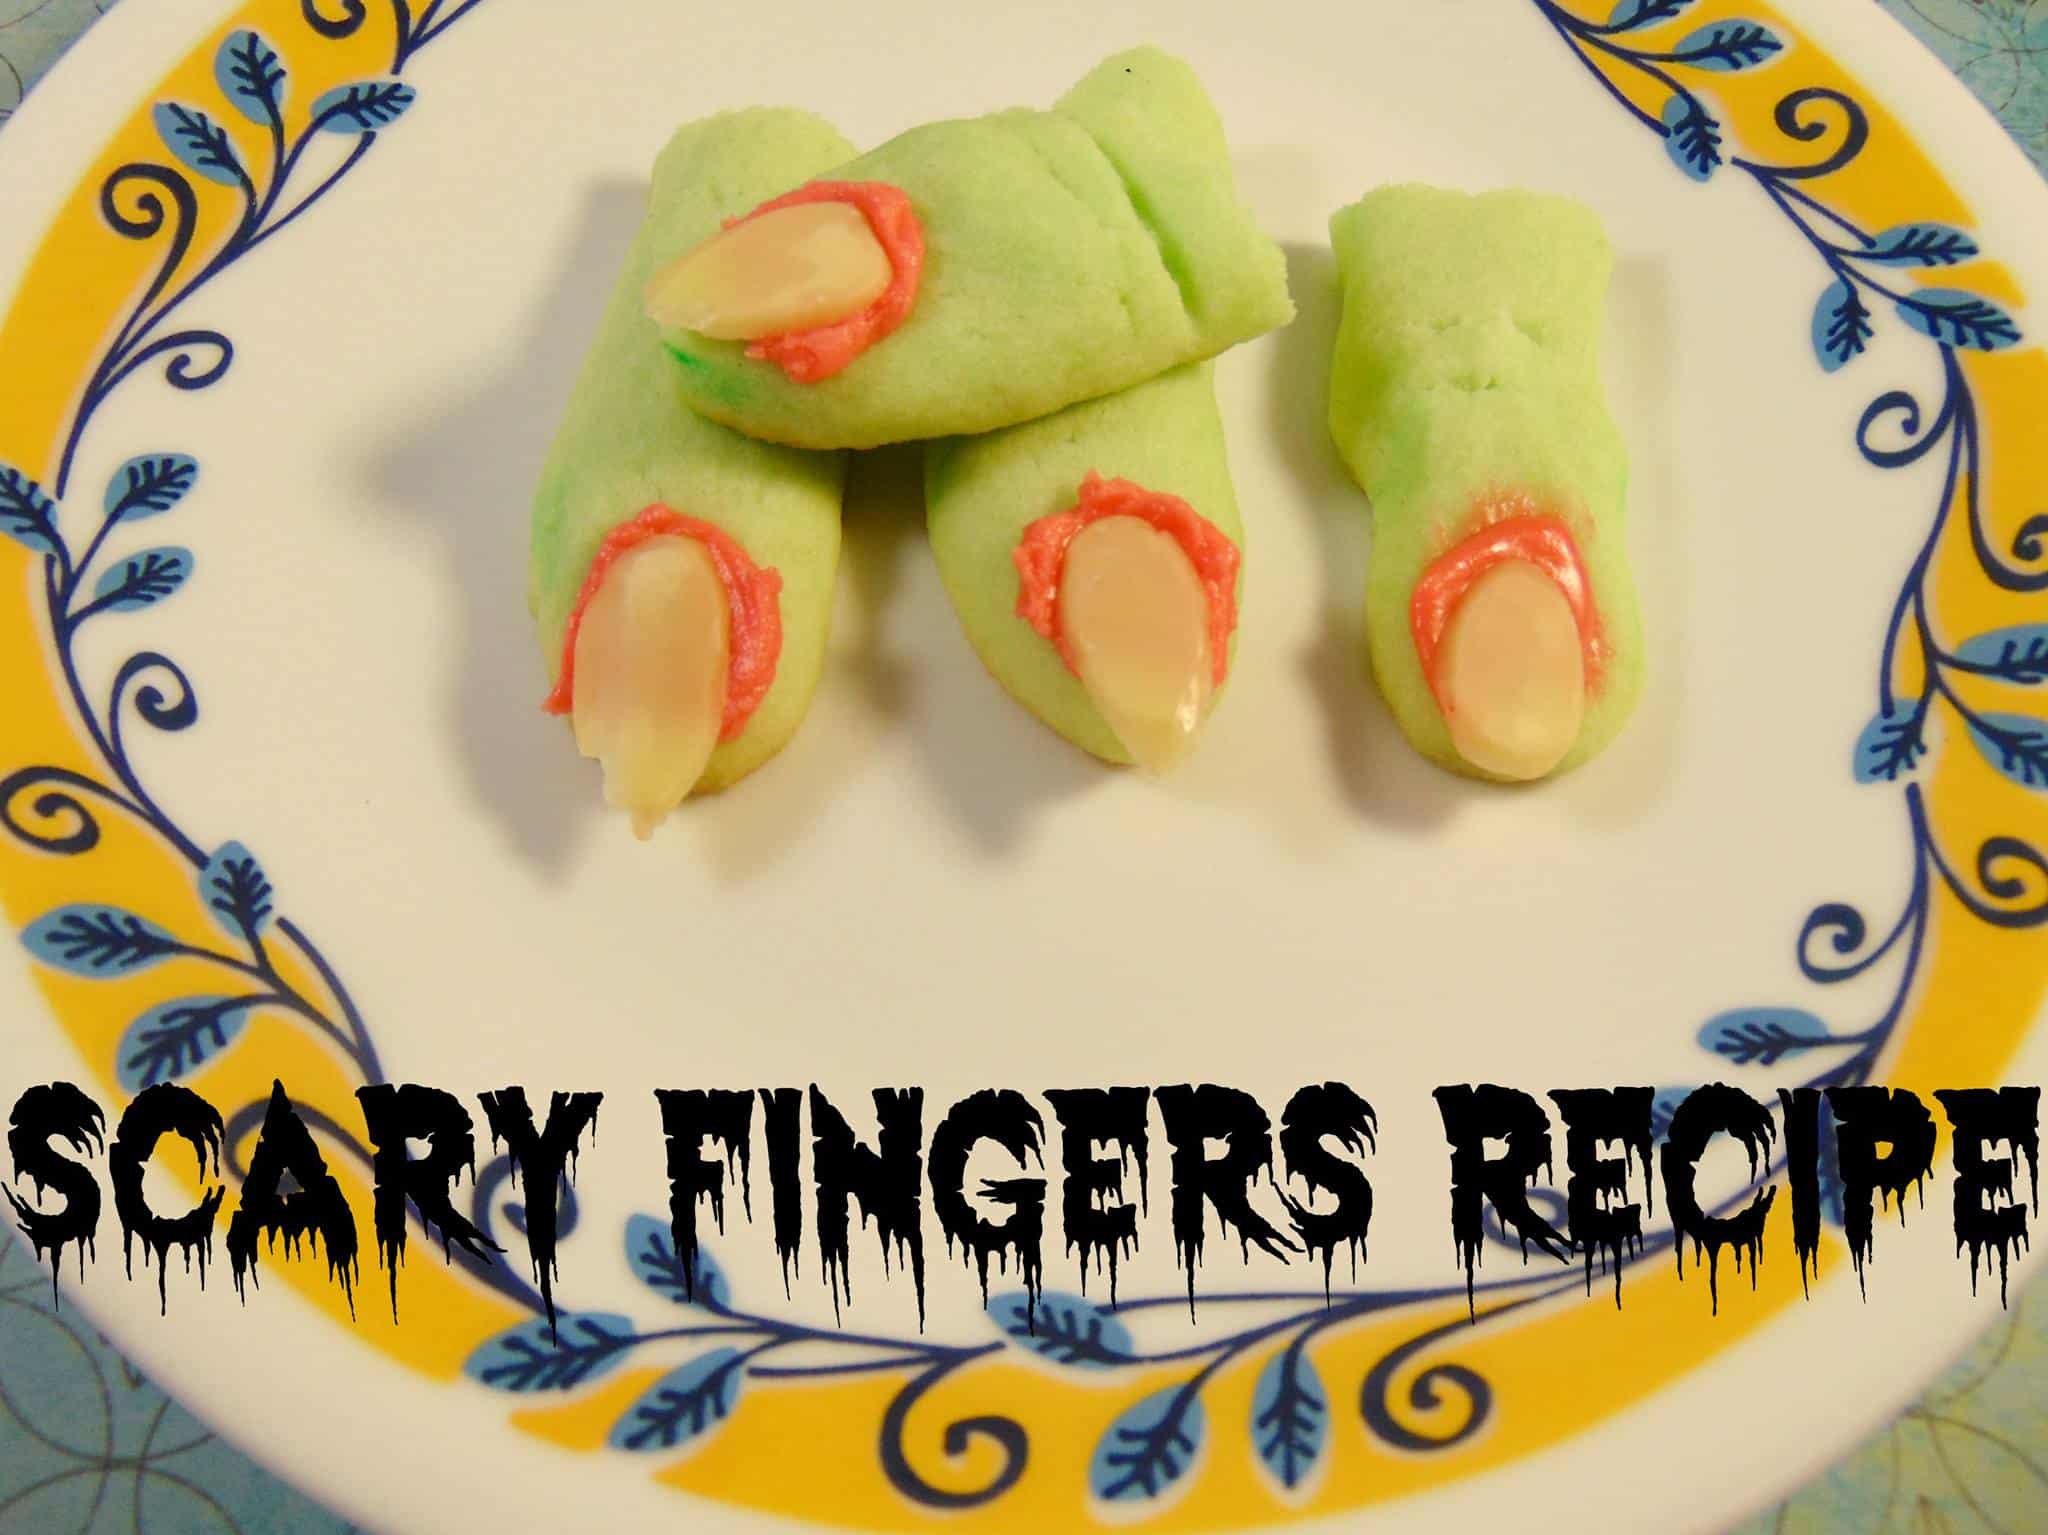 Scary Fingers